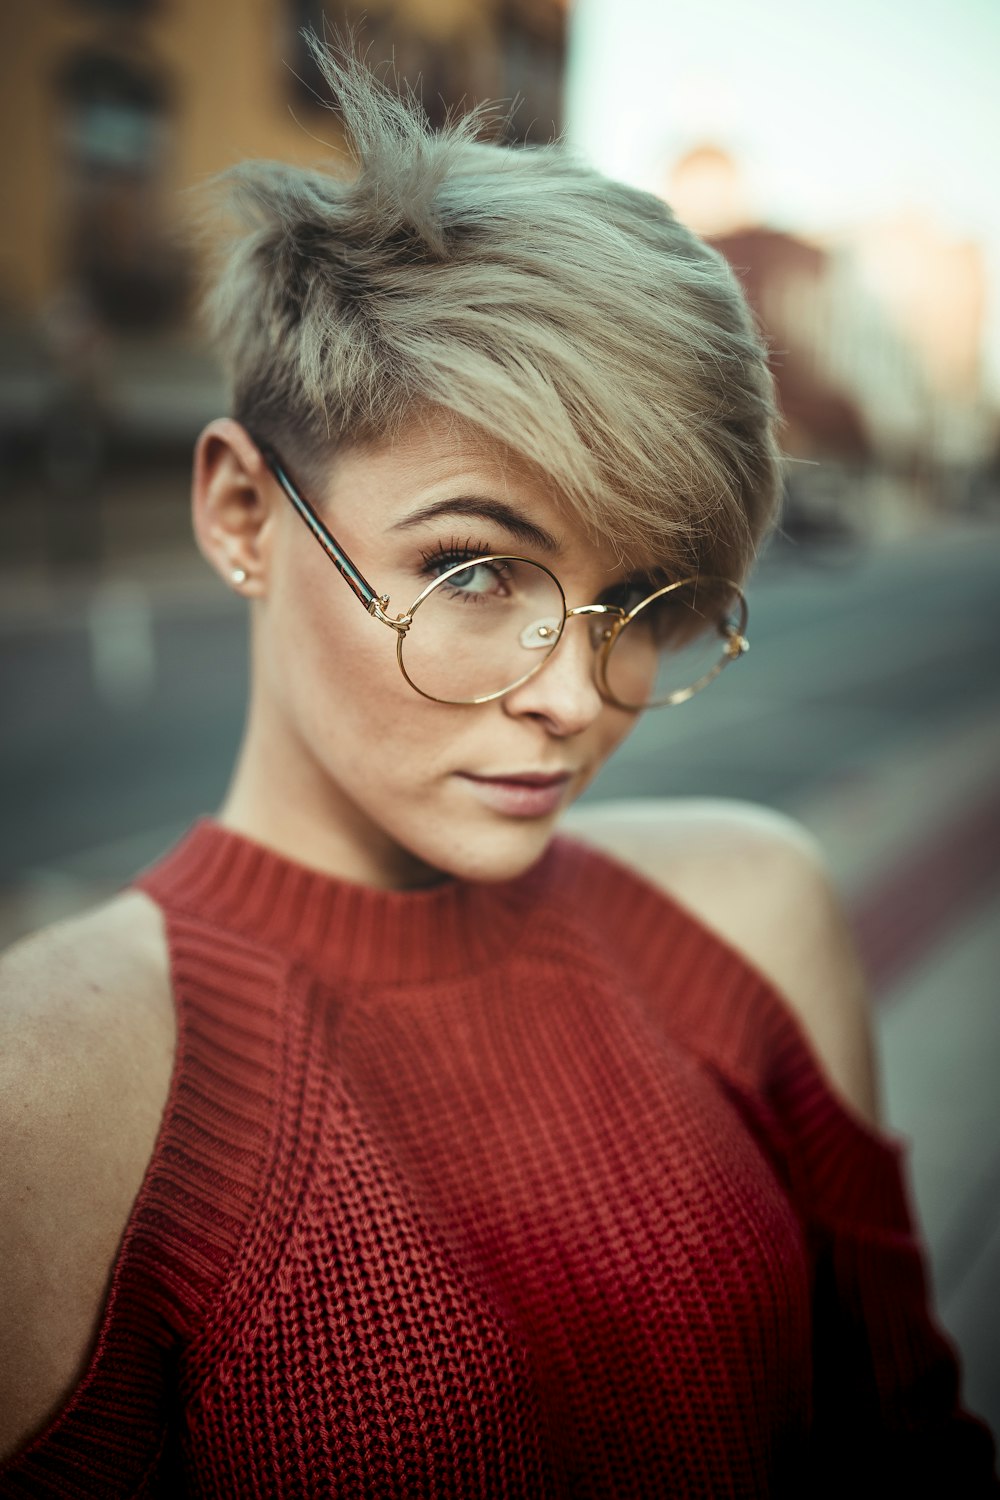 Girl Short Hair Pictures | Download Free Images on Unsplash